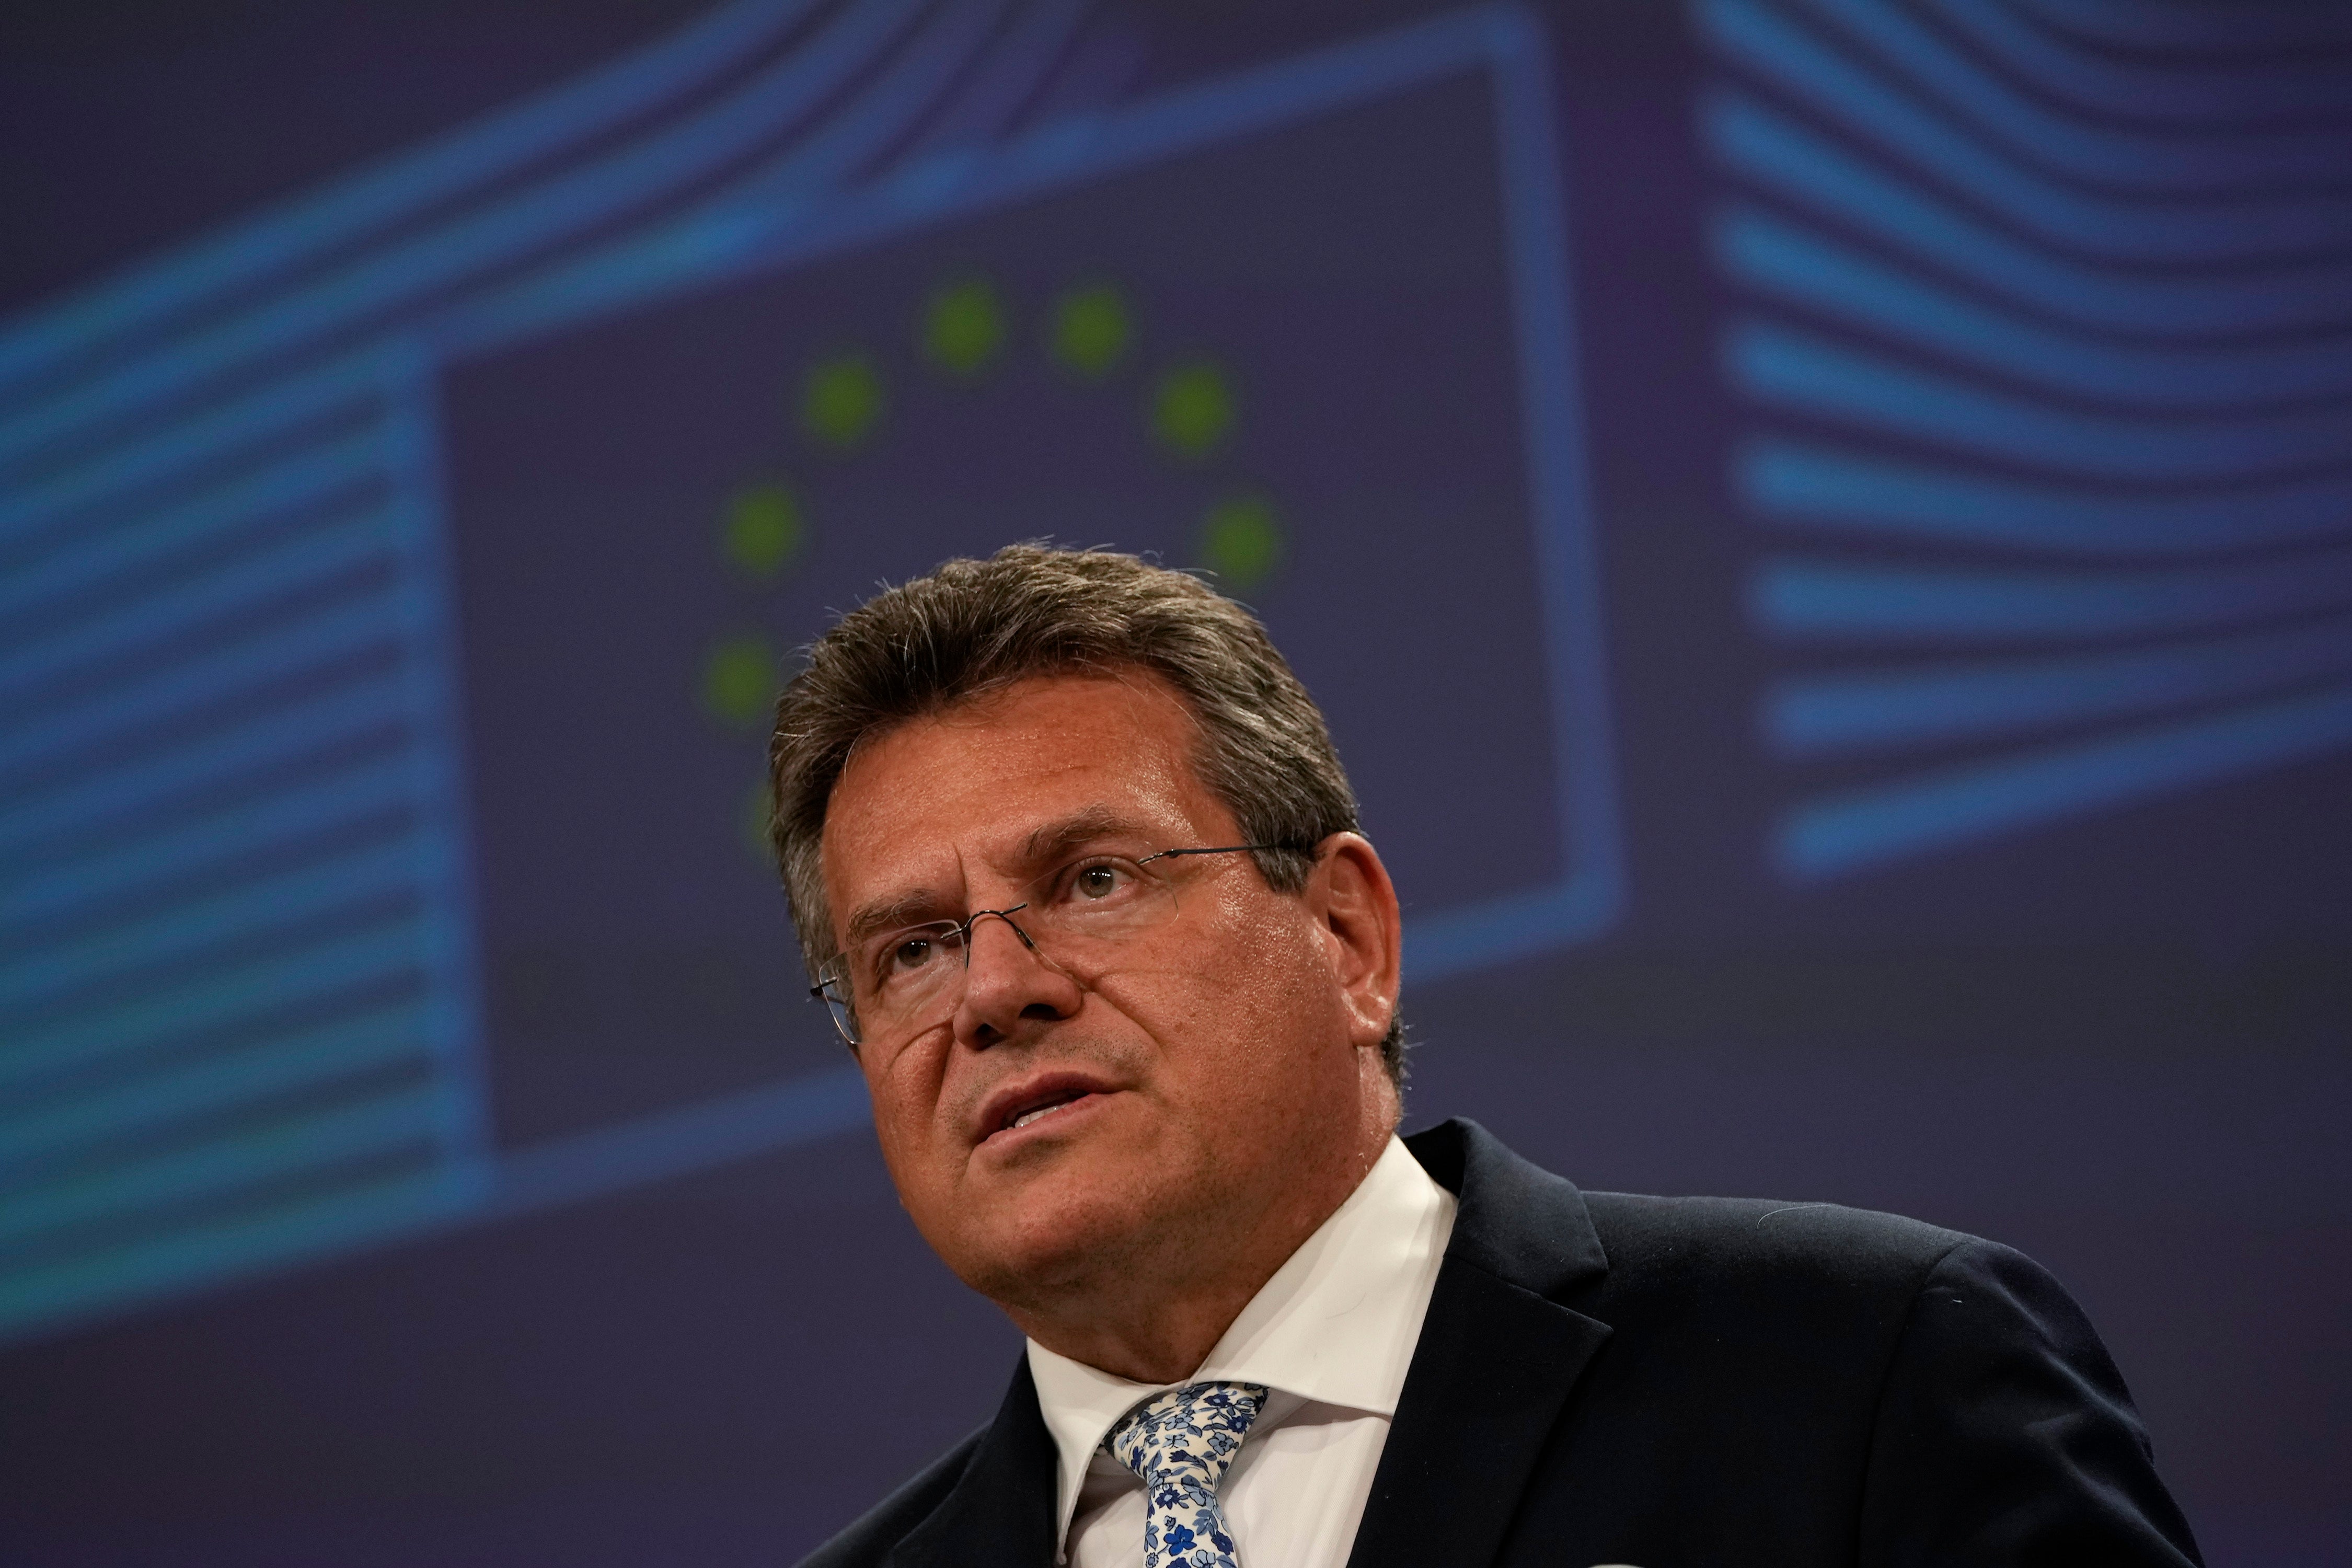 ‘We are not issuing a blank cheque’, the Commission vice-president Maros Sefcovic warned the UK